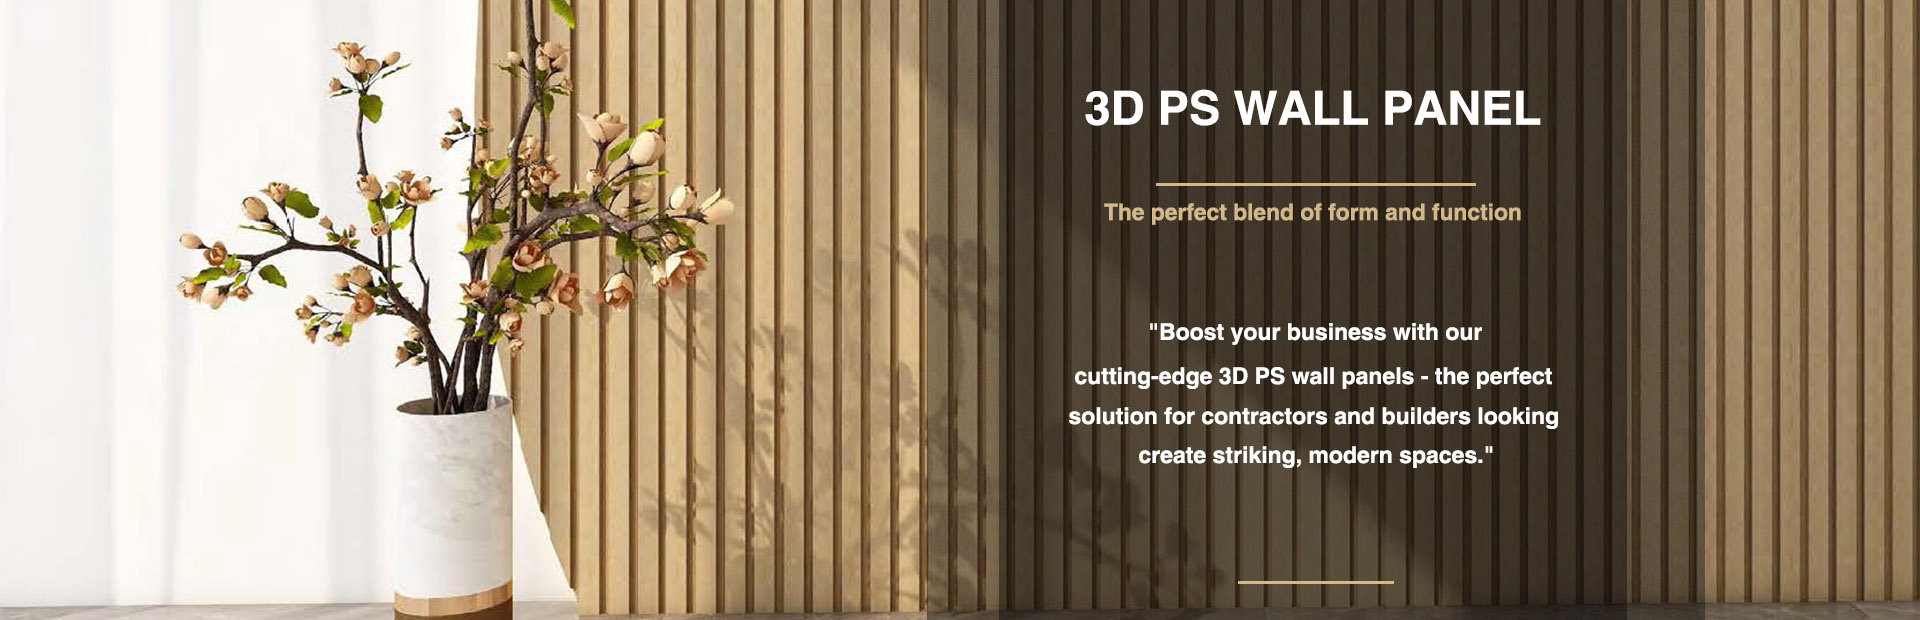 3d ps wall panel supplier